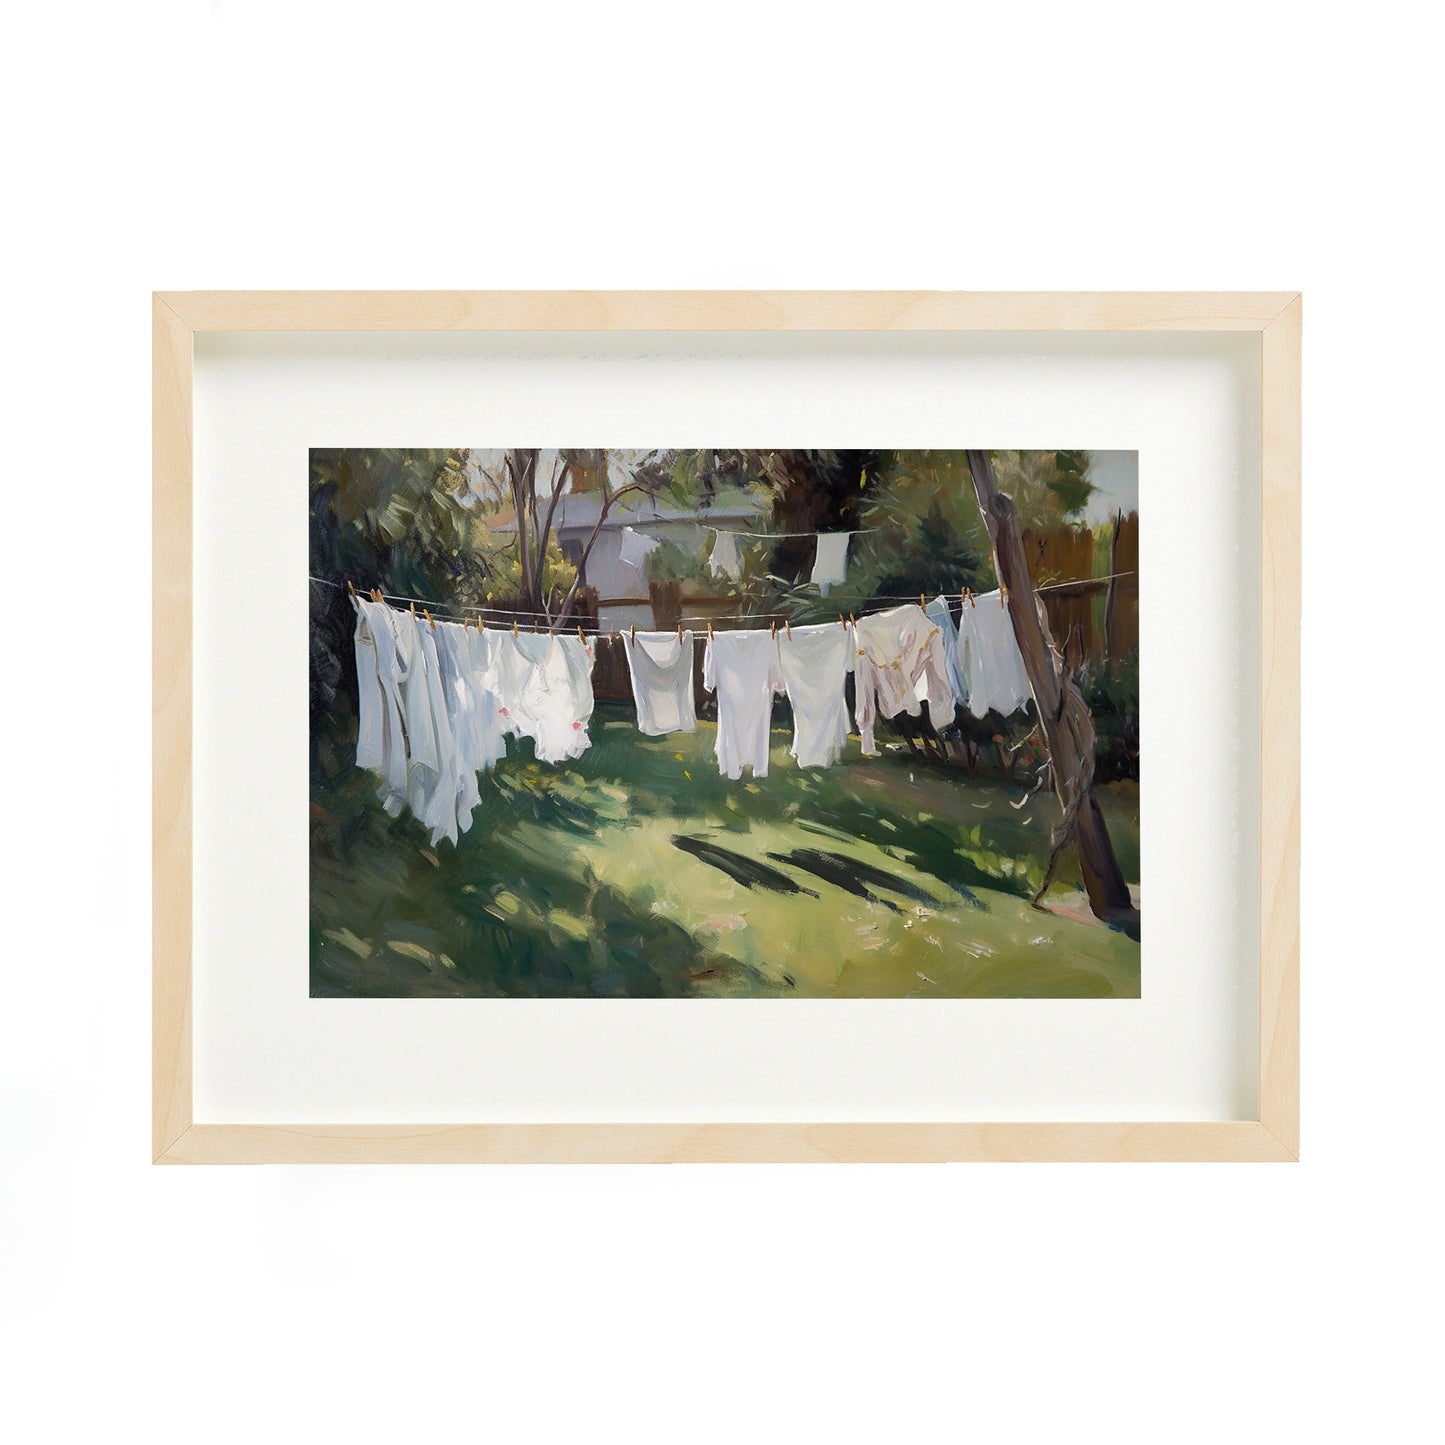 Laundry in the Yard – Vintage Art Print